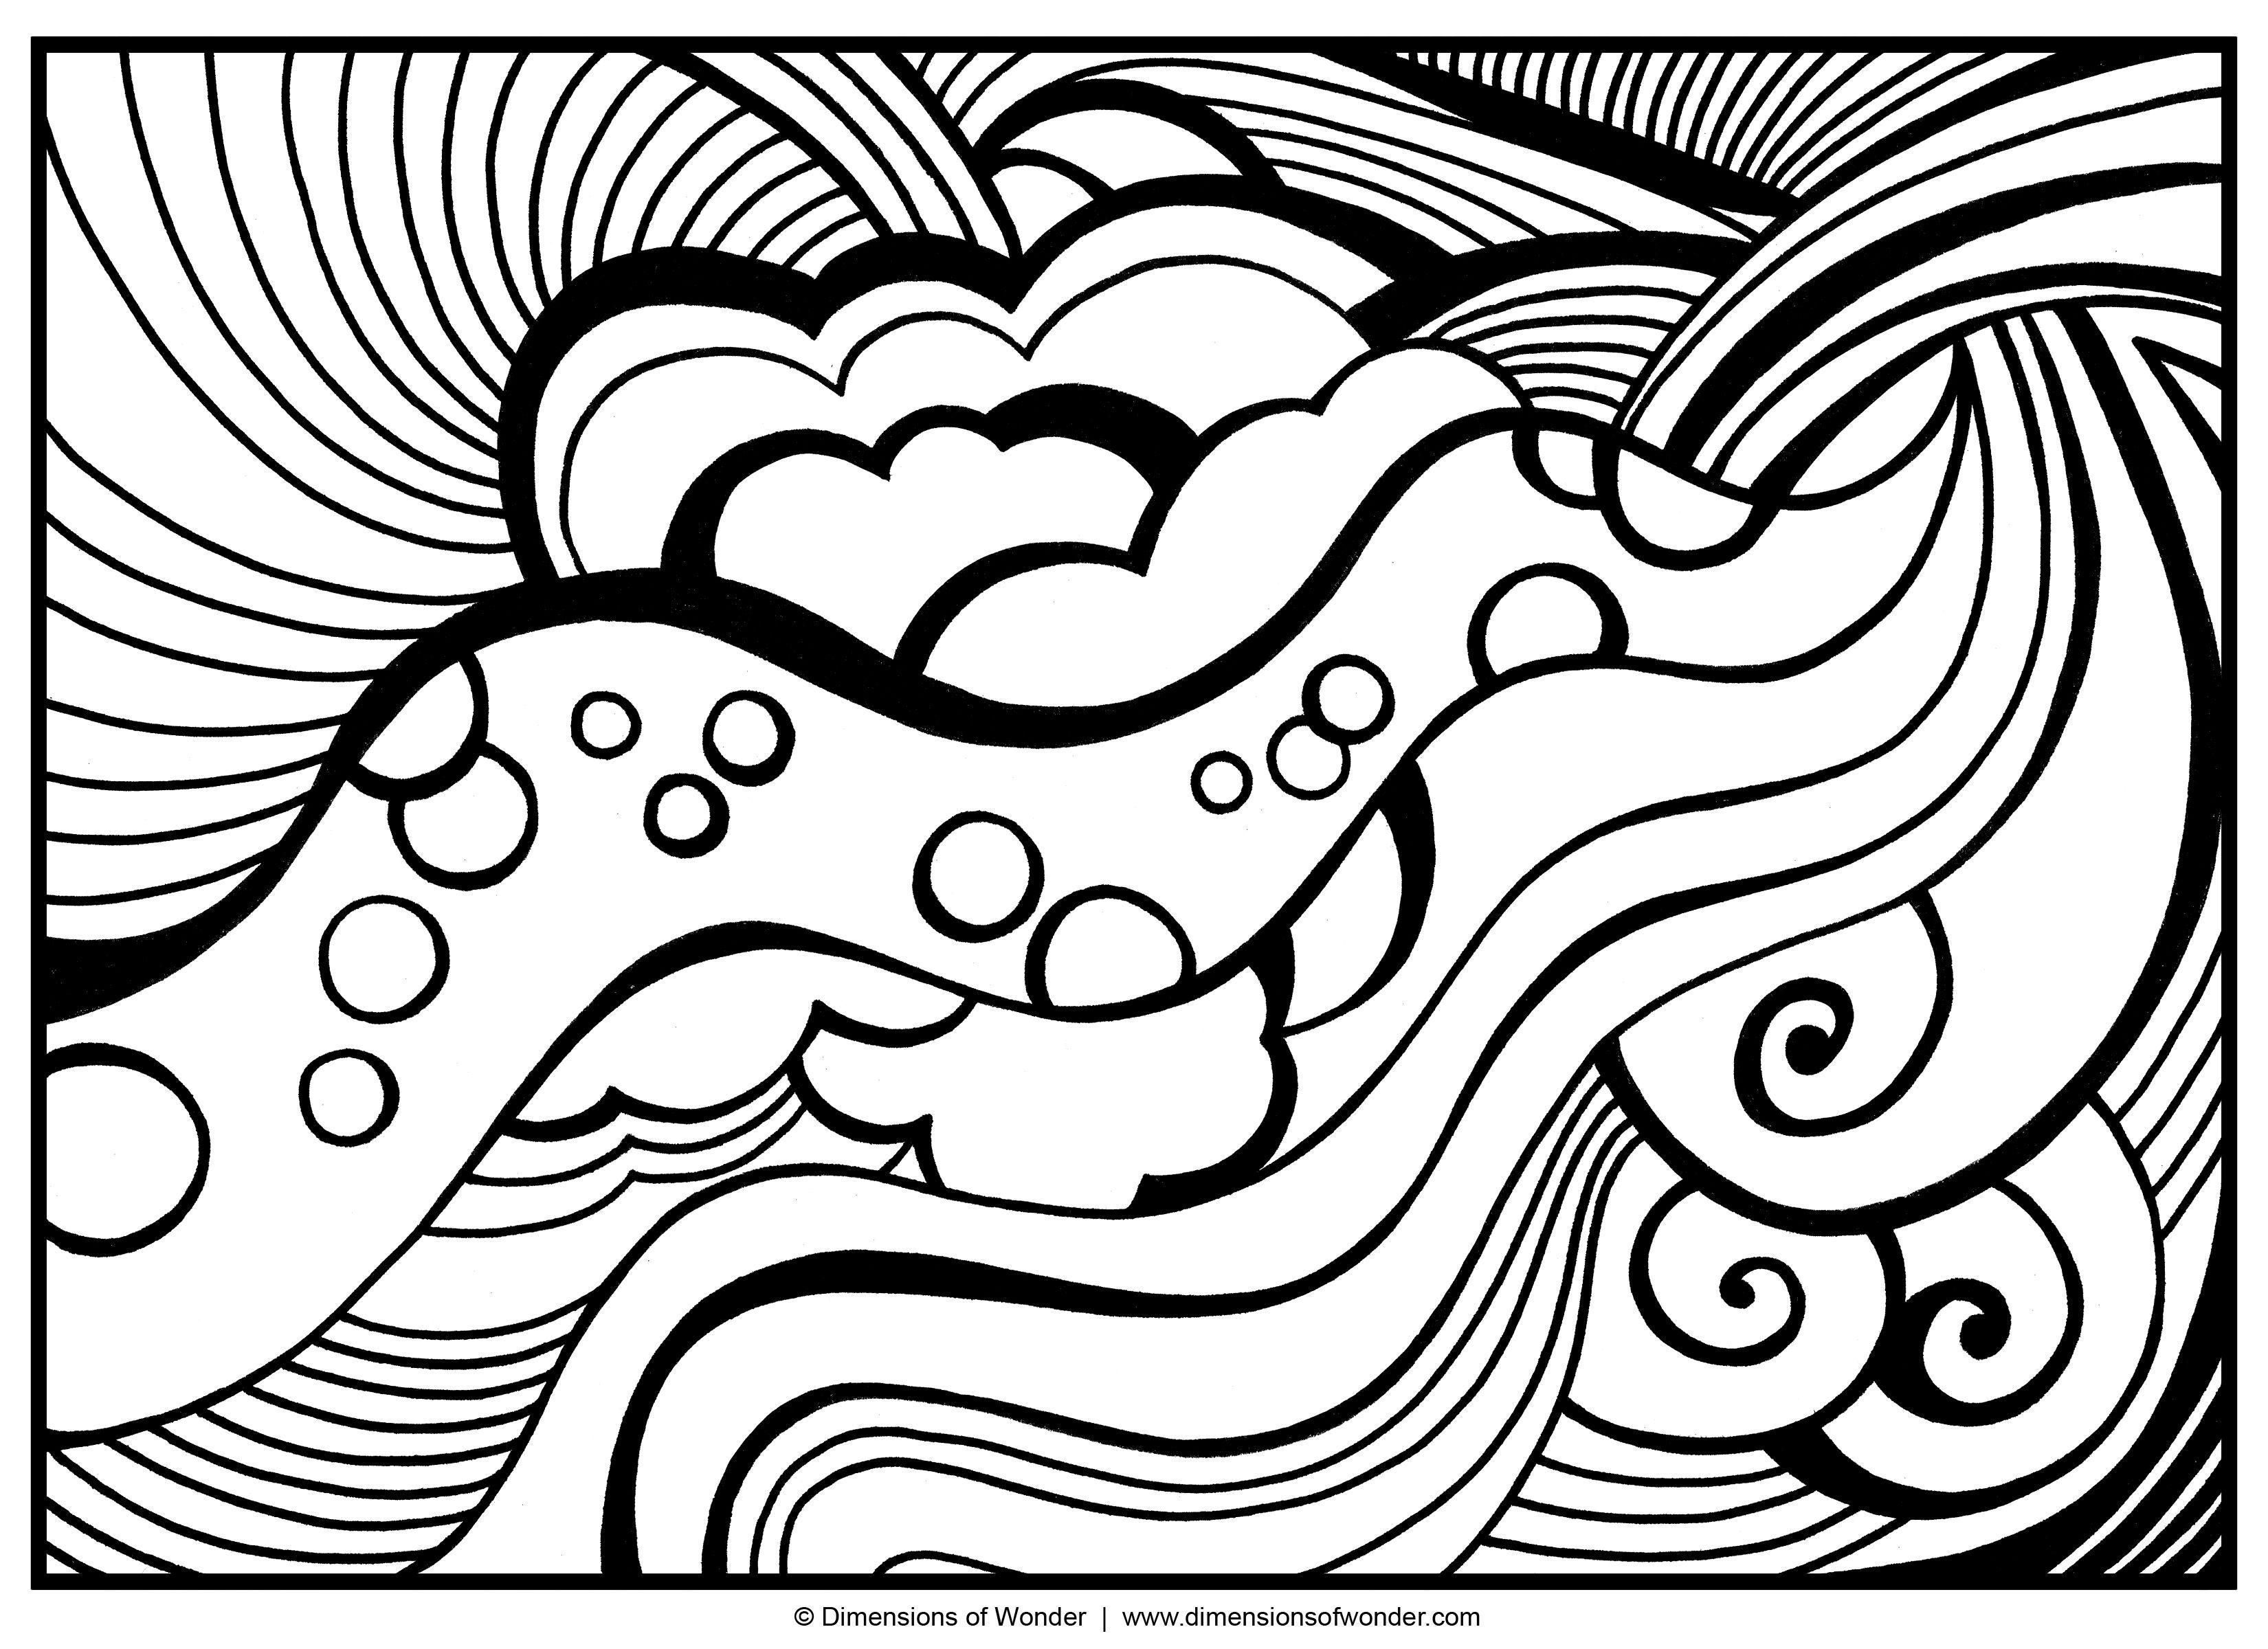 Free Coloring Pages Abstract Designs, Download Free Coloring Pages